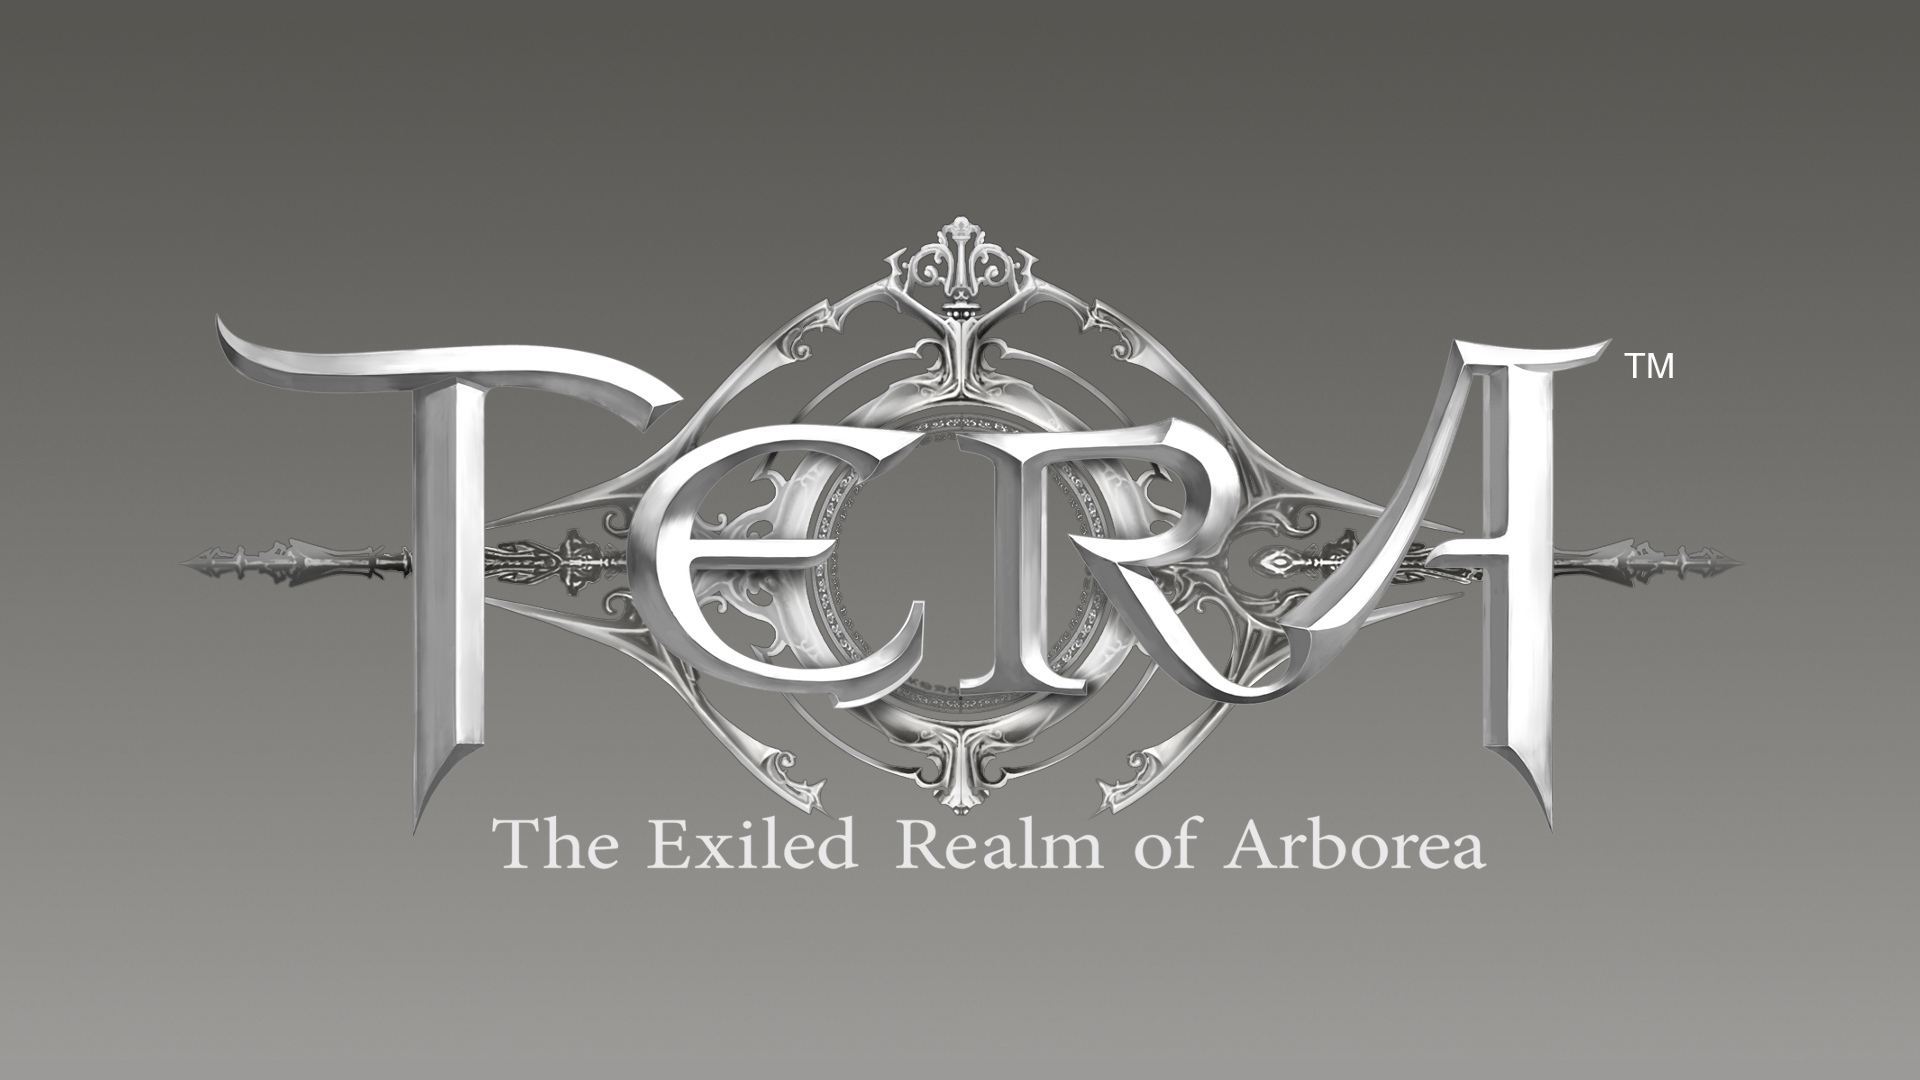 Windows Mmo Theme With Tera Online Wallpaper